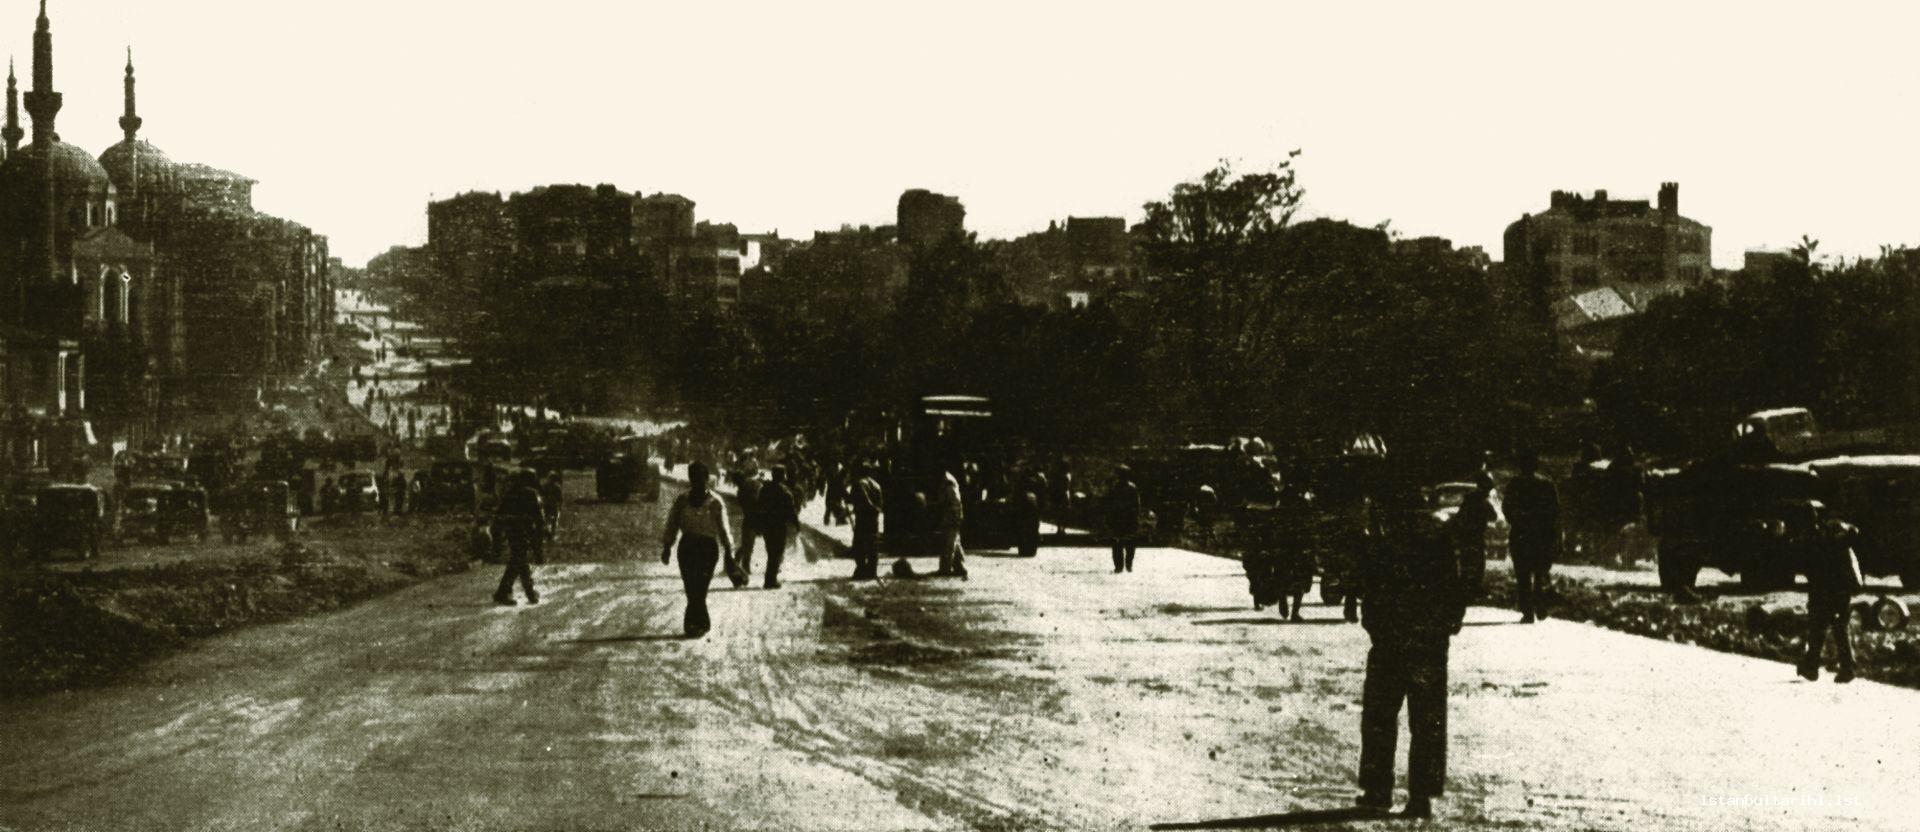 9- Millet Avenue which was opened during the ruling of Democrat Party. After starting at Topkapı, it passes through Şehremini, Çapa, Taşkasap and reaches Aksaray Square and from there connects to Vatan Avenue. During the construction of this avenue many historical monuments along with districts were disappeared. (<em>İstanbul’un Kitabı</em>)